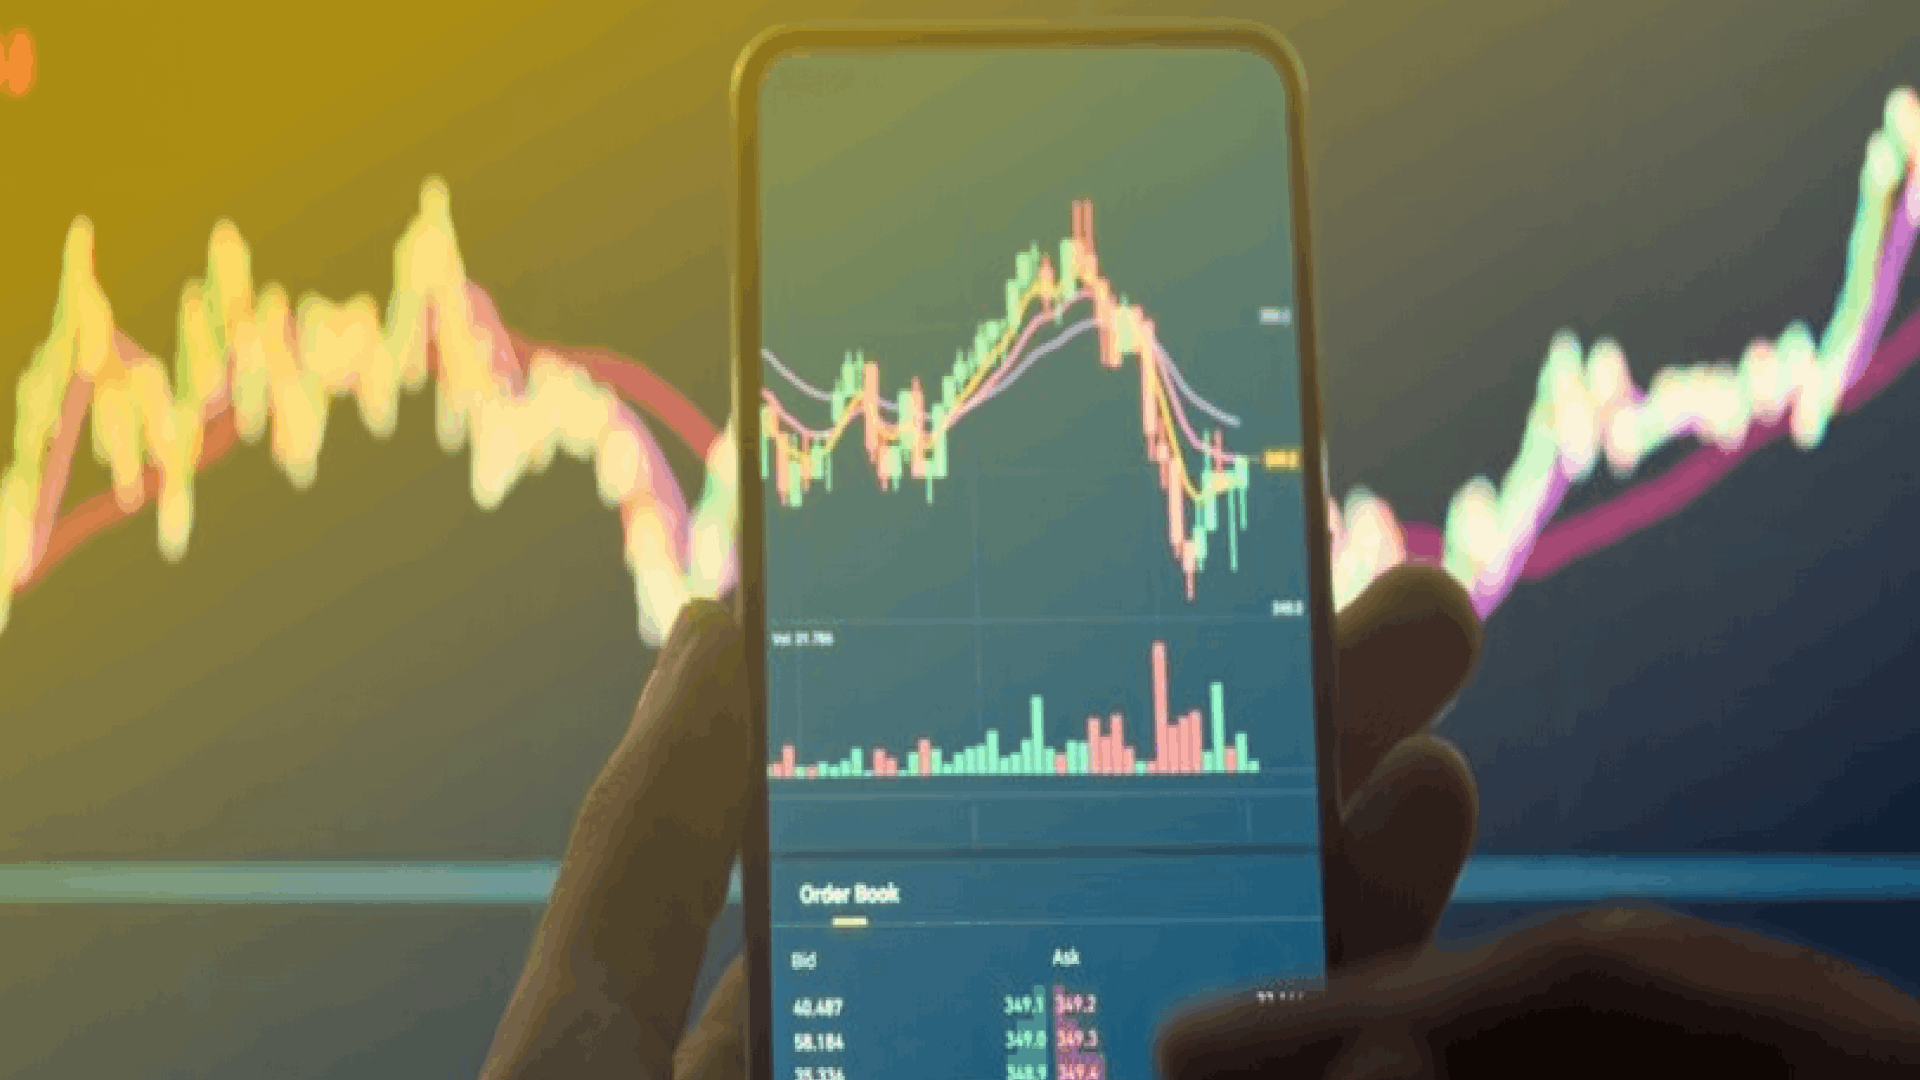 20 Best Cryptocurrency Trading Strategies - Quantified Trading Strategies